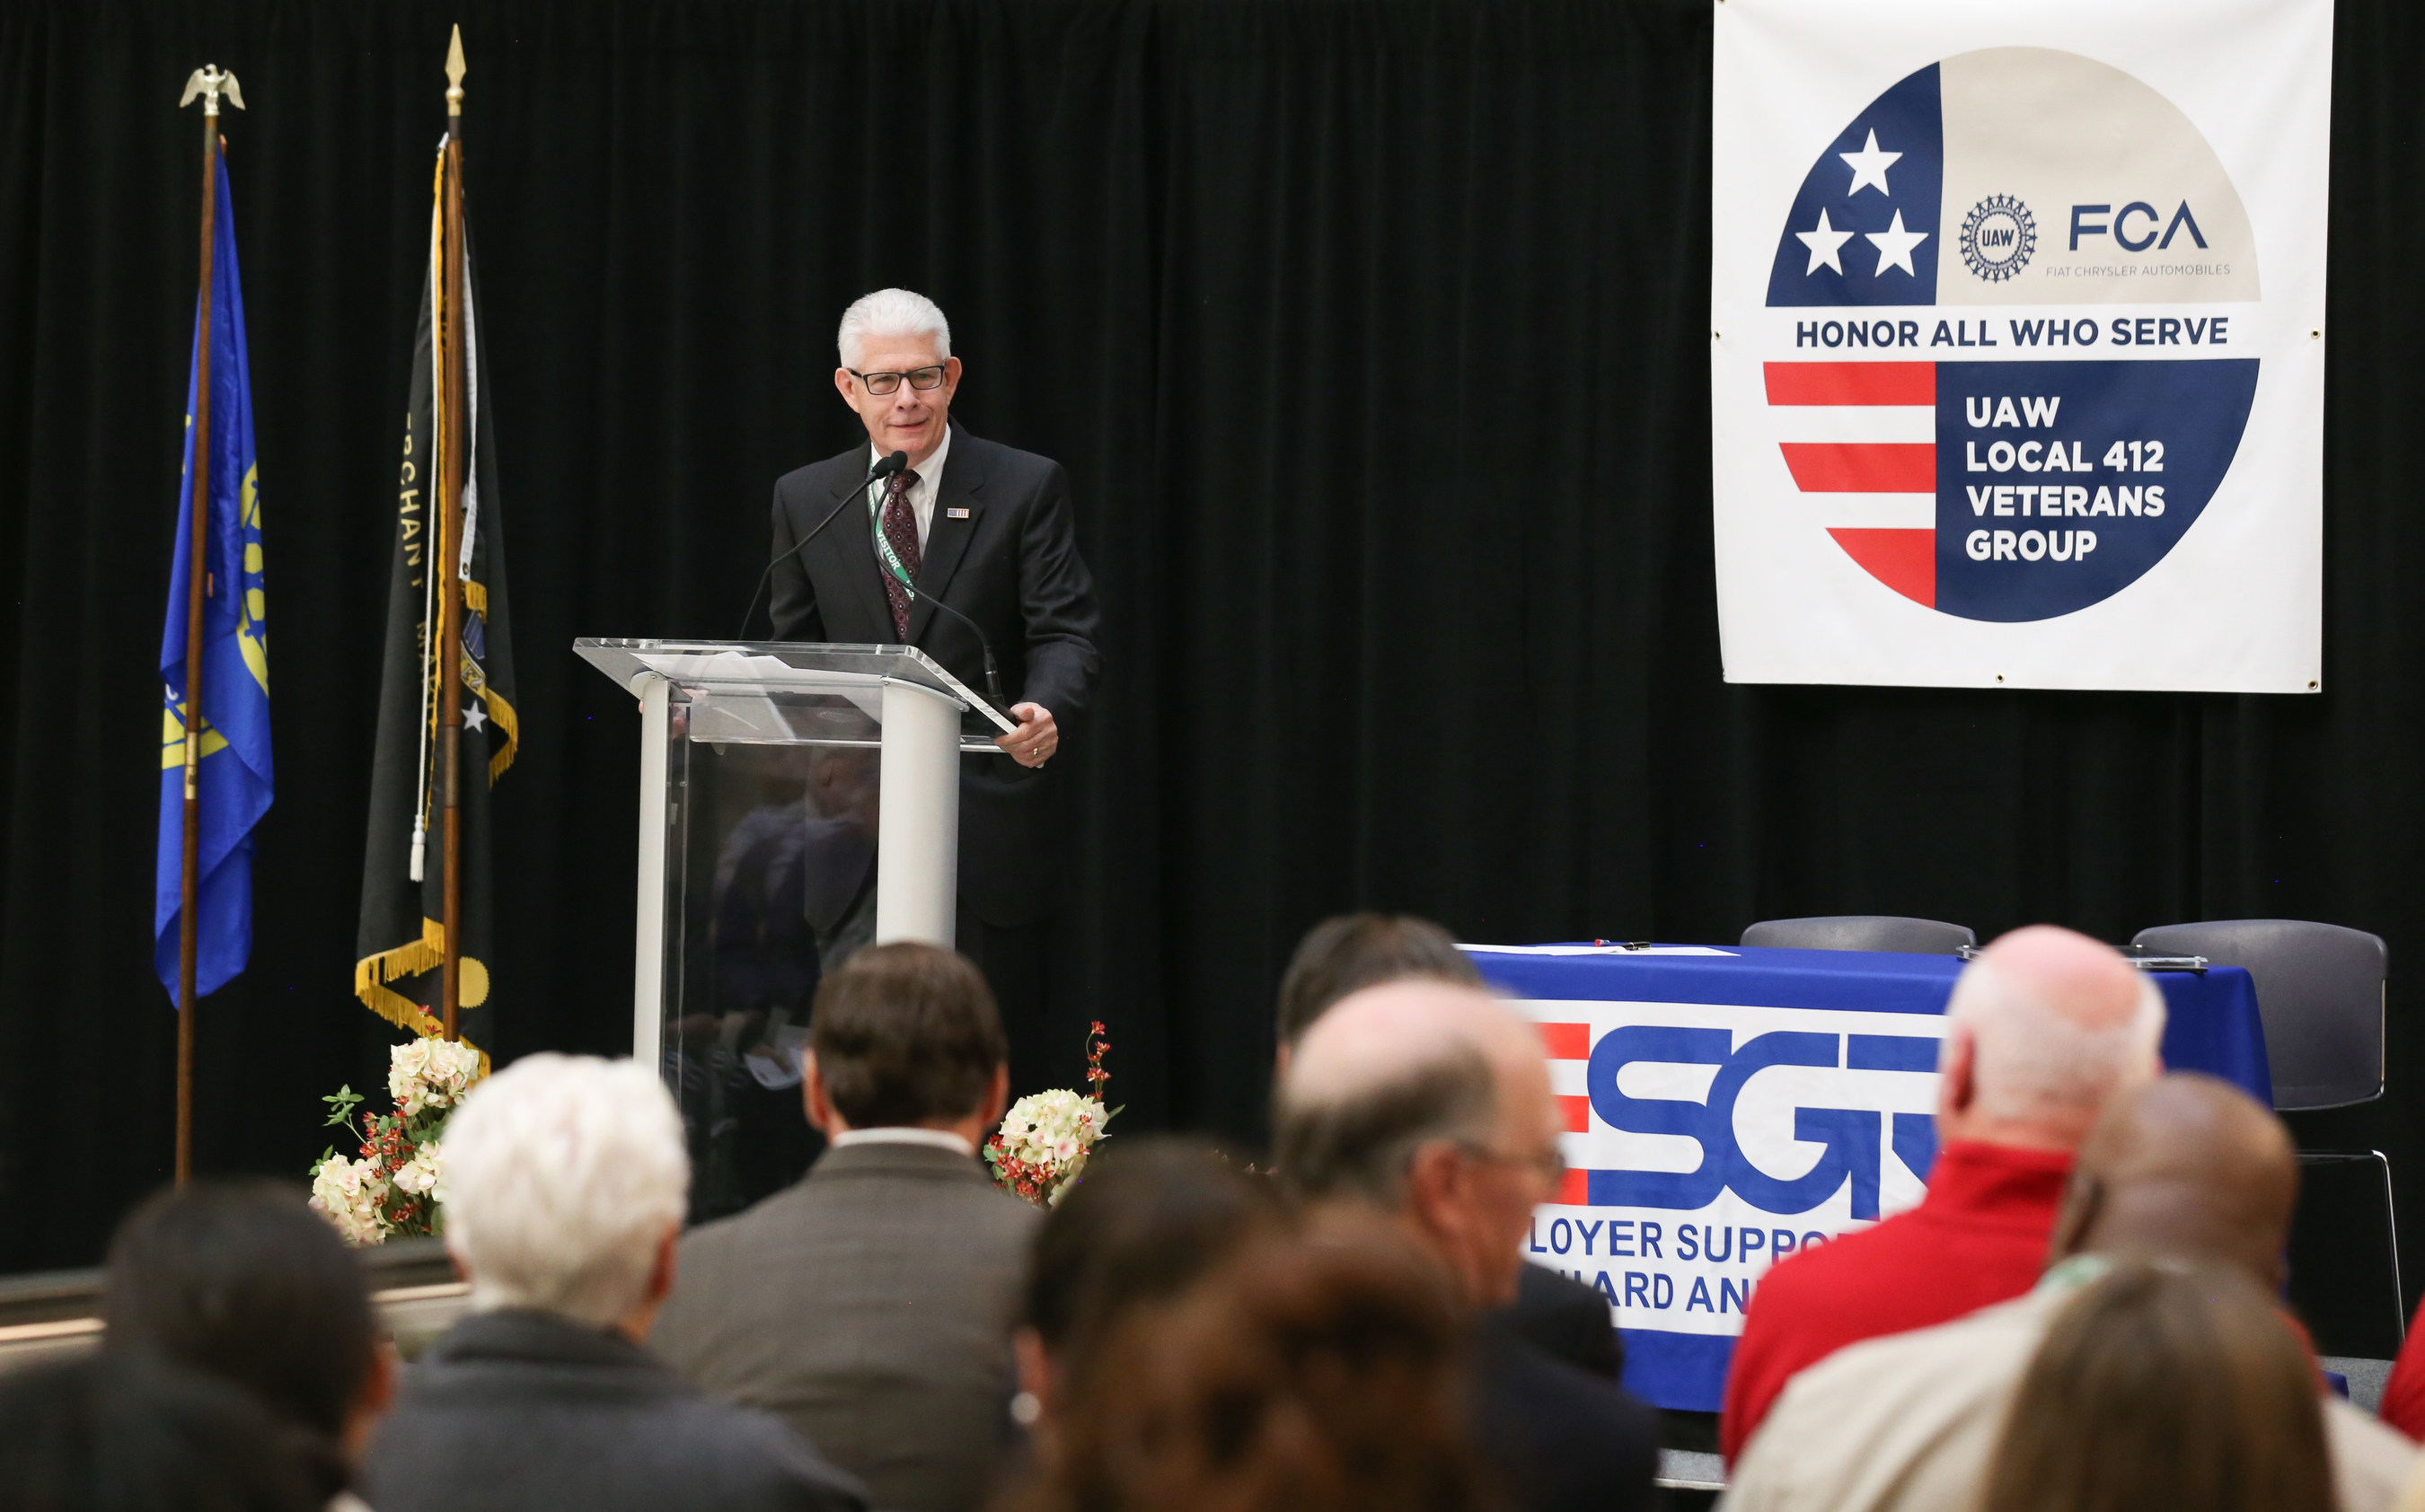 Tom Bullock of ESGR described the intent of the Statement of Support.